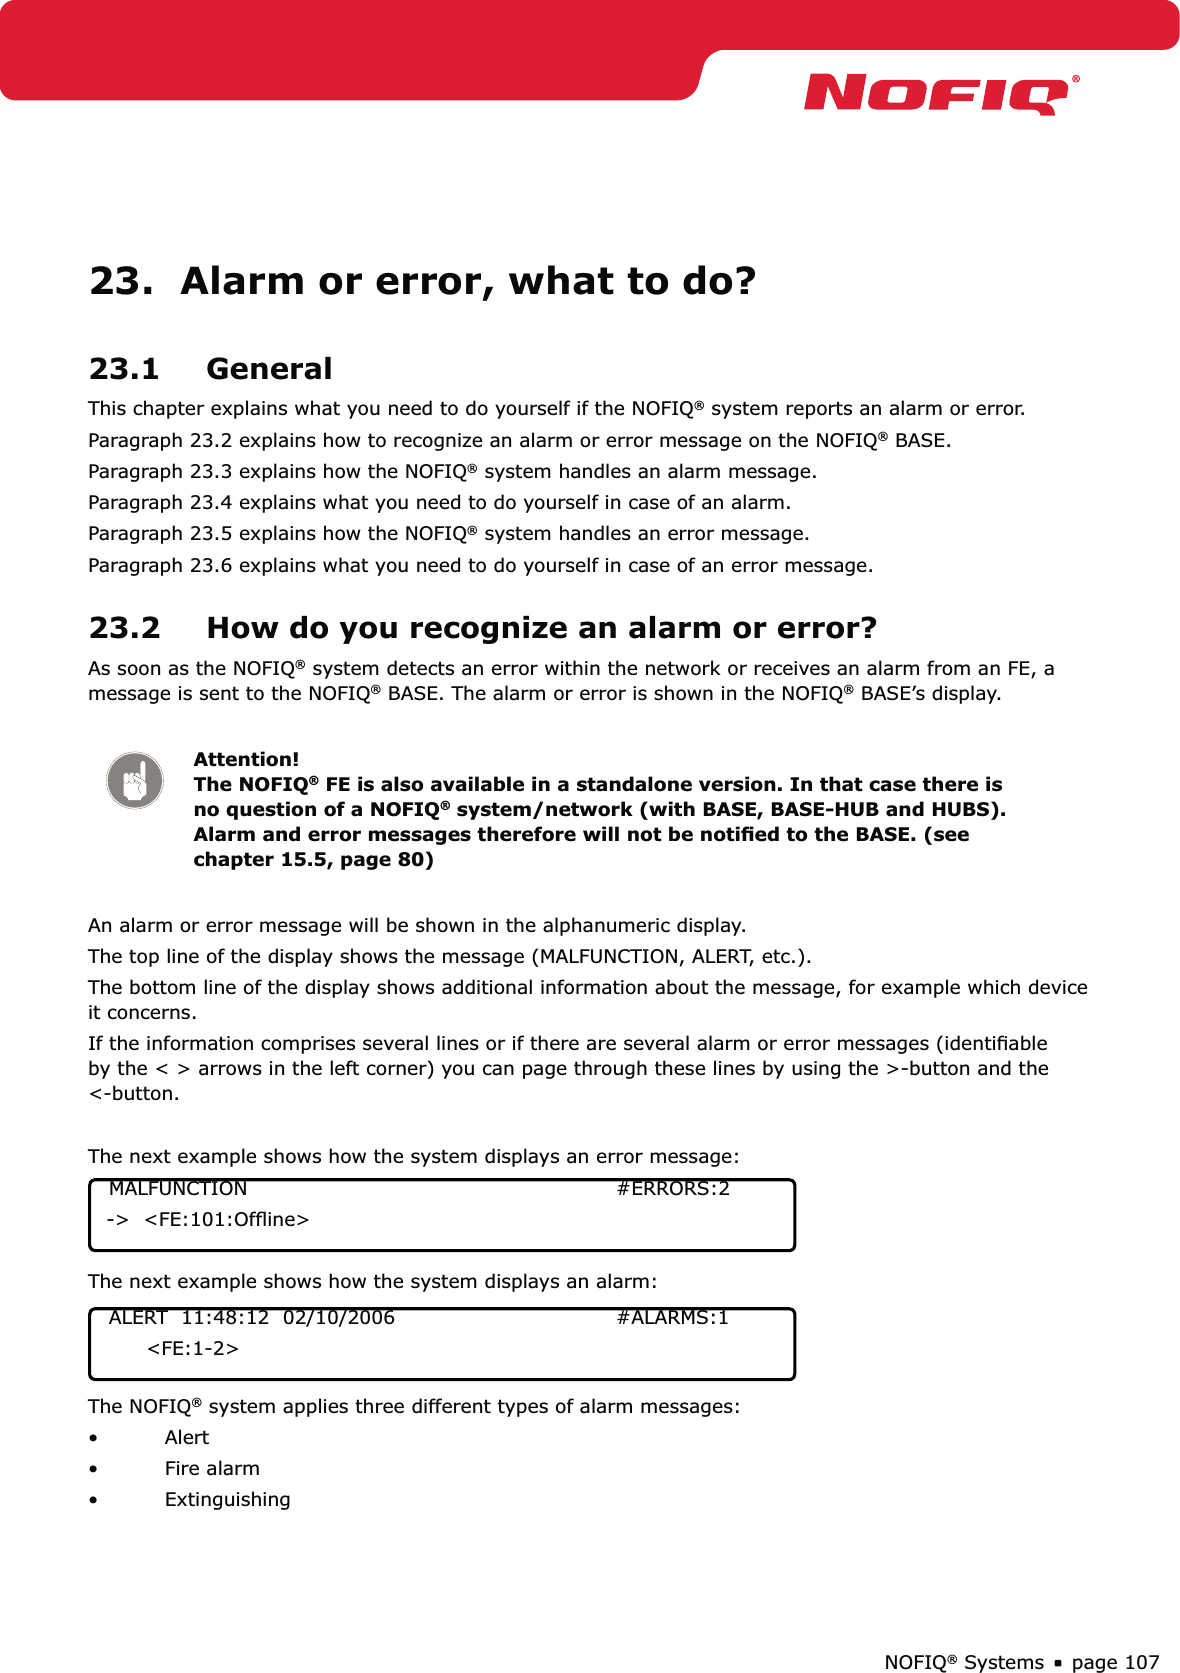 page 107NOFIQ® Systems23.  Alarm or error, what to do?23.1 GeneralThis chapter explains what you need to do yourself if the NOFIQ® system reports an alarm or error. Paragraph 23.2 explains how to recognize an alarm or error message on the NOFIQ® BASE.Paragraph 23.3 explains how the NOFIQ® system handles an alarm message.Paragraph 23.4 explains what you need to do yourself in case of an alarm.Paragraph 23.5 explains how the NOFIQ® system handles an error message.Paragraph 23.6 explains what you need to do yourself in case of an error message.23.2  How do you recognize an alarm or error?As soon as the NOFIQ® system detects an error within the network or receives an alarm from an FE, a message is sent to the NOFIQ® BASE. The alarm or error is shown in the NOFIQ® BASE’s display.Attention! The NOFIQ® FE is also available in a standalone version. In that case there is no question of a NOFIQ® system/network (with BASE, BASE-HUB and HUBS). Alarm and error messages therefore will not be notiﬁed to the BASE. (see chapter 15.5, page 80)An alarm or error message will be shown in the alphanumeric display.The top line of the display shows the message (MALFUNCTION, ALERT, etc.).The bottom line of the display shows additional information about the message, for example which device it concerns.If the information comprises several lines or if there are several alarm or error messages (identiﬁable by the &lt; &gt; arrows in the left corner) you can page through these lines by using the &gt;-button and the &lt;-button. The next example shows how the system displays an error message:  MALFUNCTION     #ERRORS:2  -&gt;  &lt;FE:101:Ofﬂine&gt;The next example shows how the system displays an alarm:  ALERT  11:48:12  02/10/2006      #ALARMS:1        &lt;FE:1-2&gt;The NOFIQ® system applies three different types of alarm messages:Alert• Fire alarm• Extinguishing• 